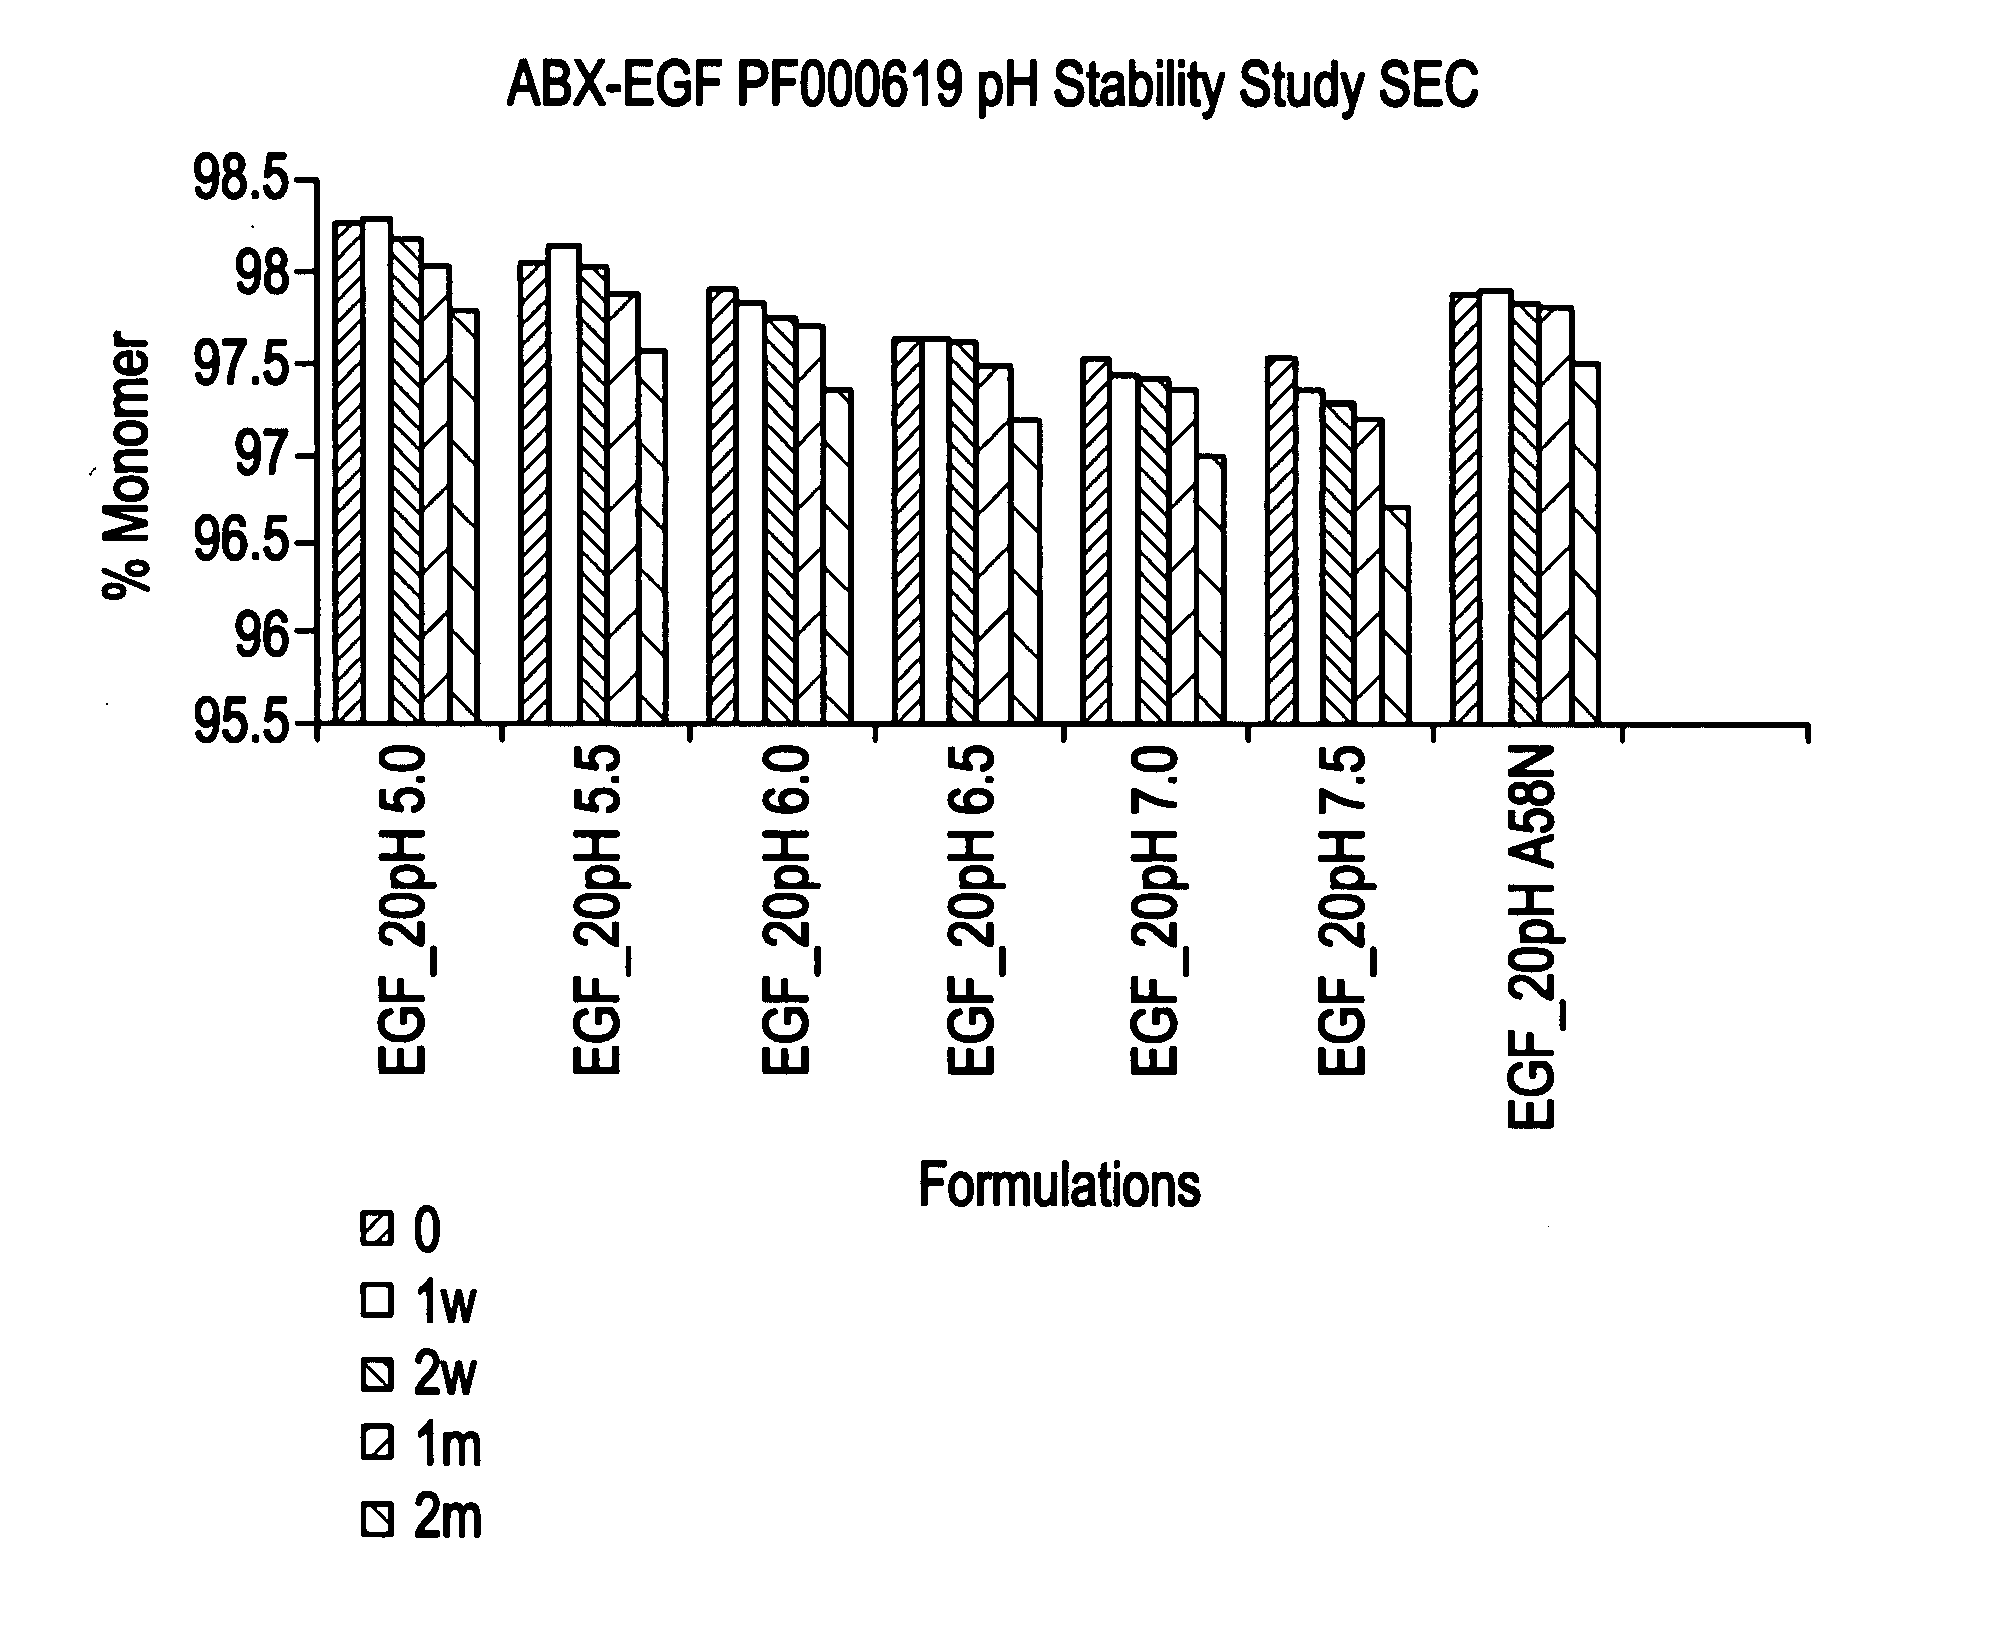 Stable polypeptide formulations